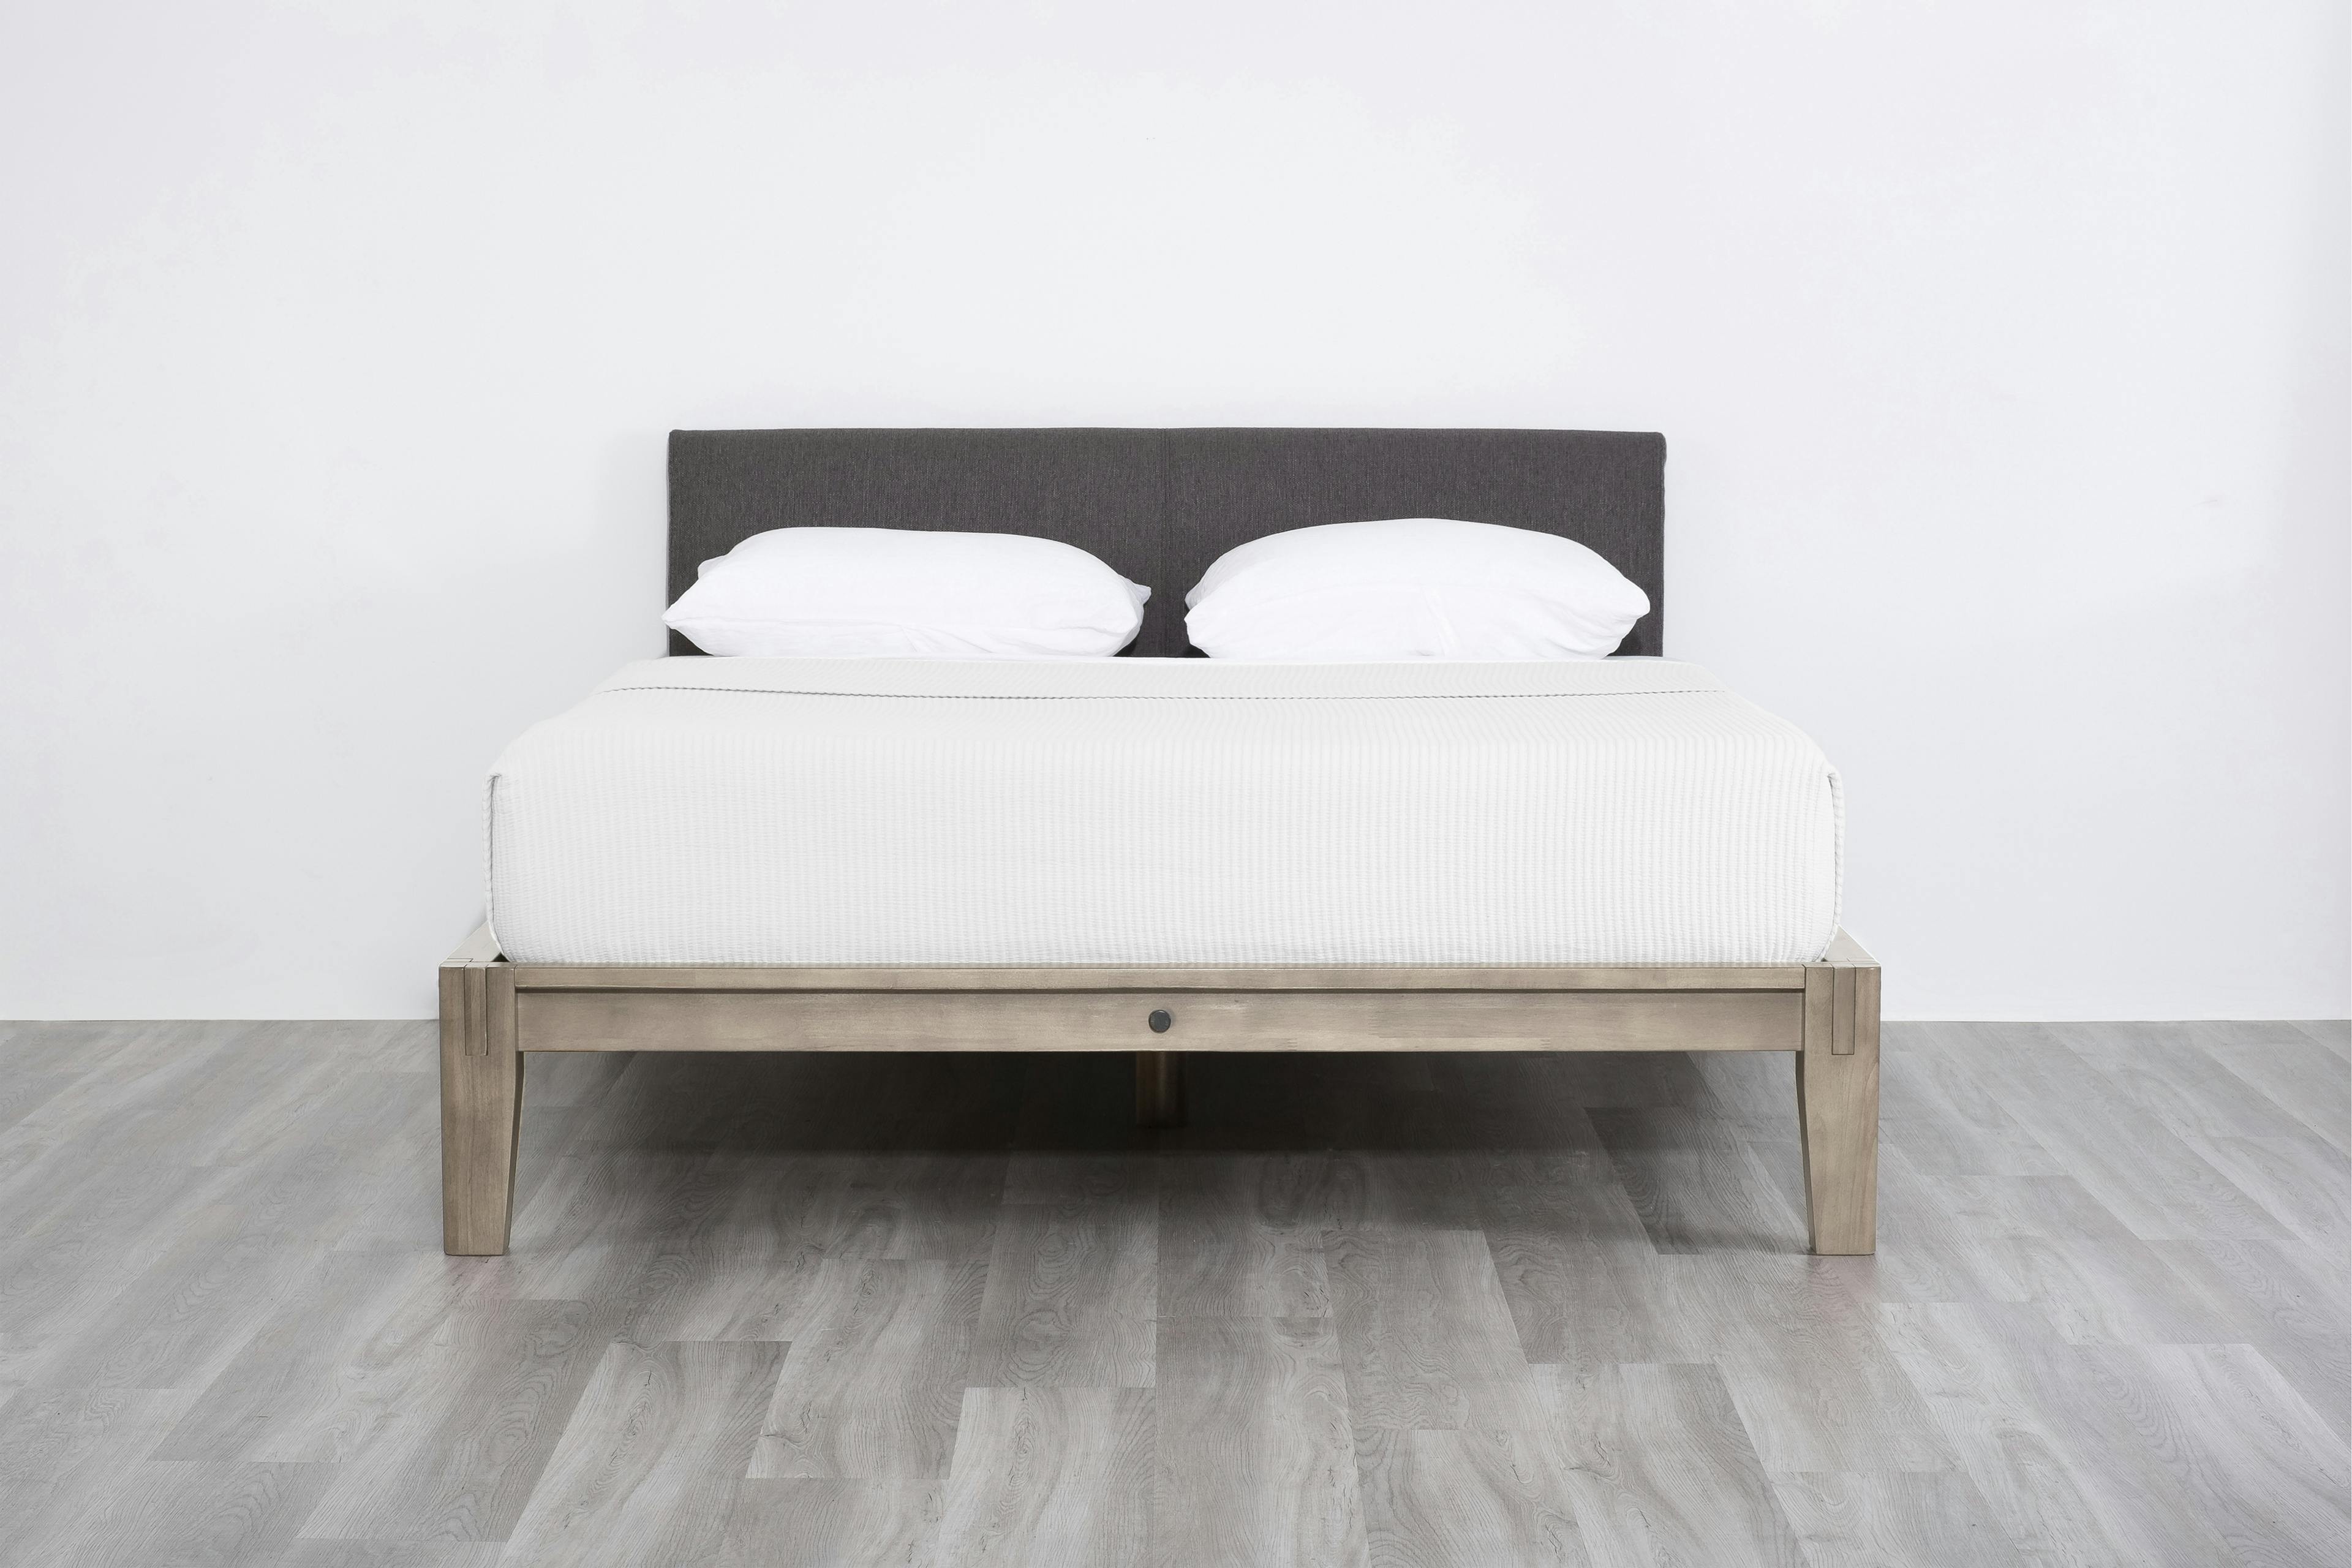 The Bed (Grey / Dark Charcoal) - Front - 3:2